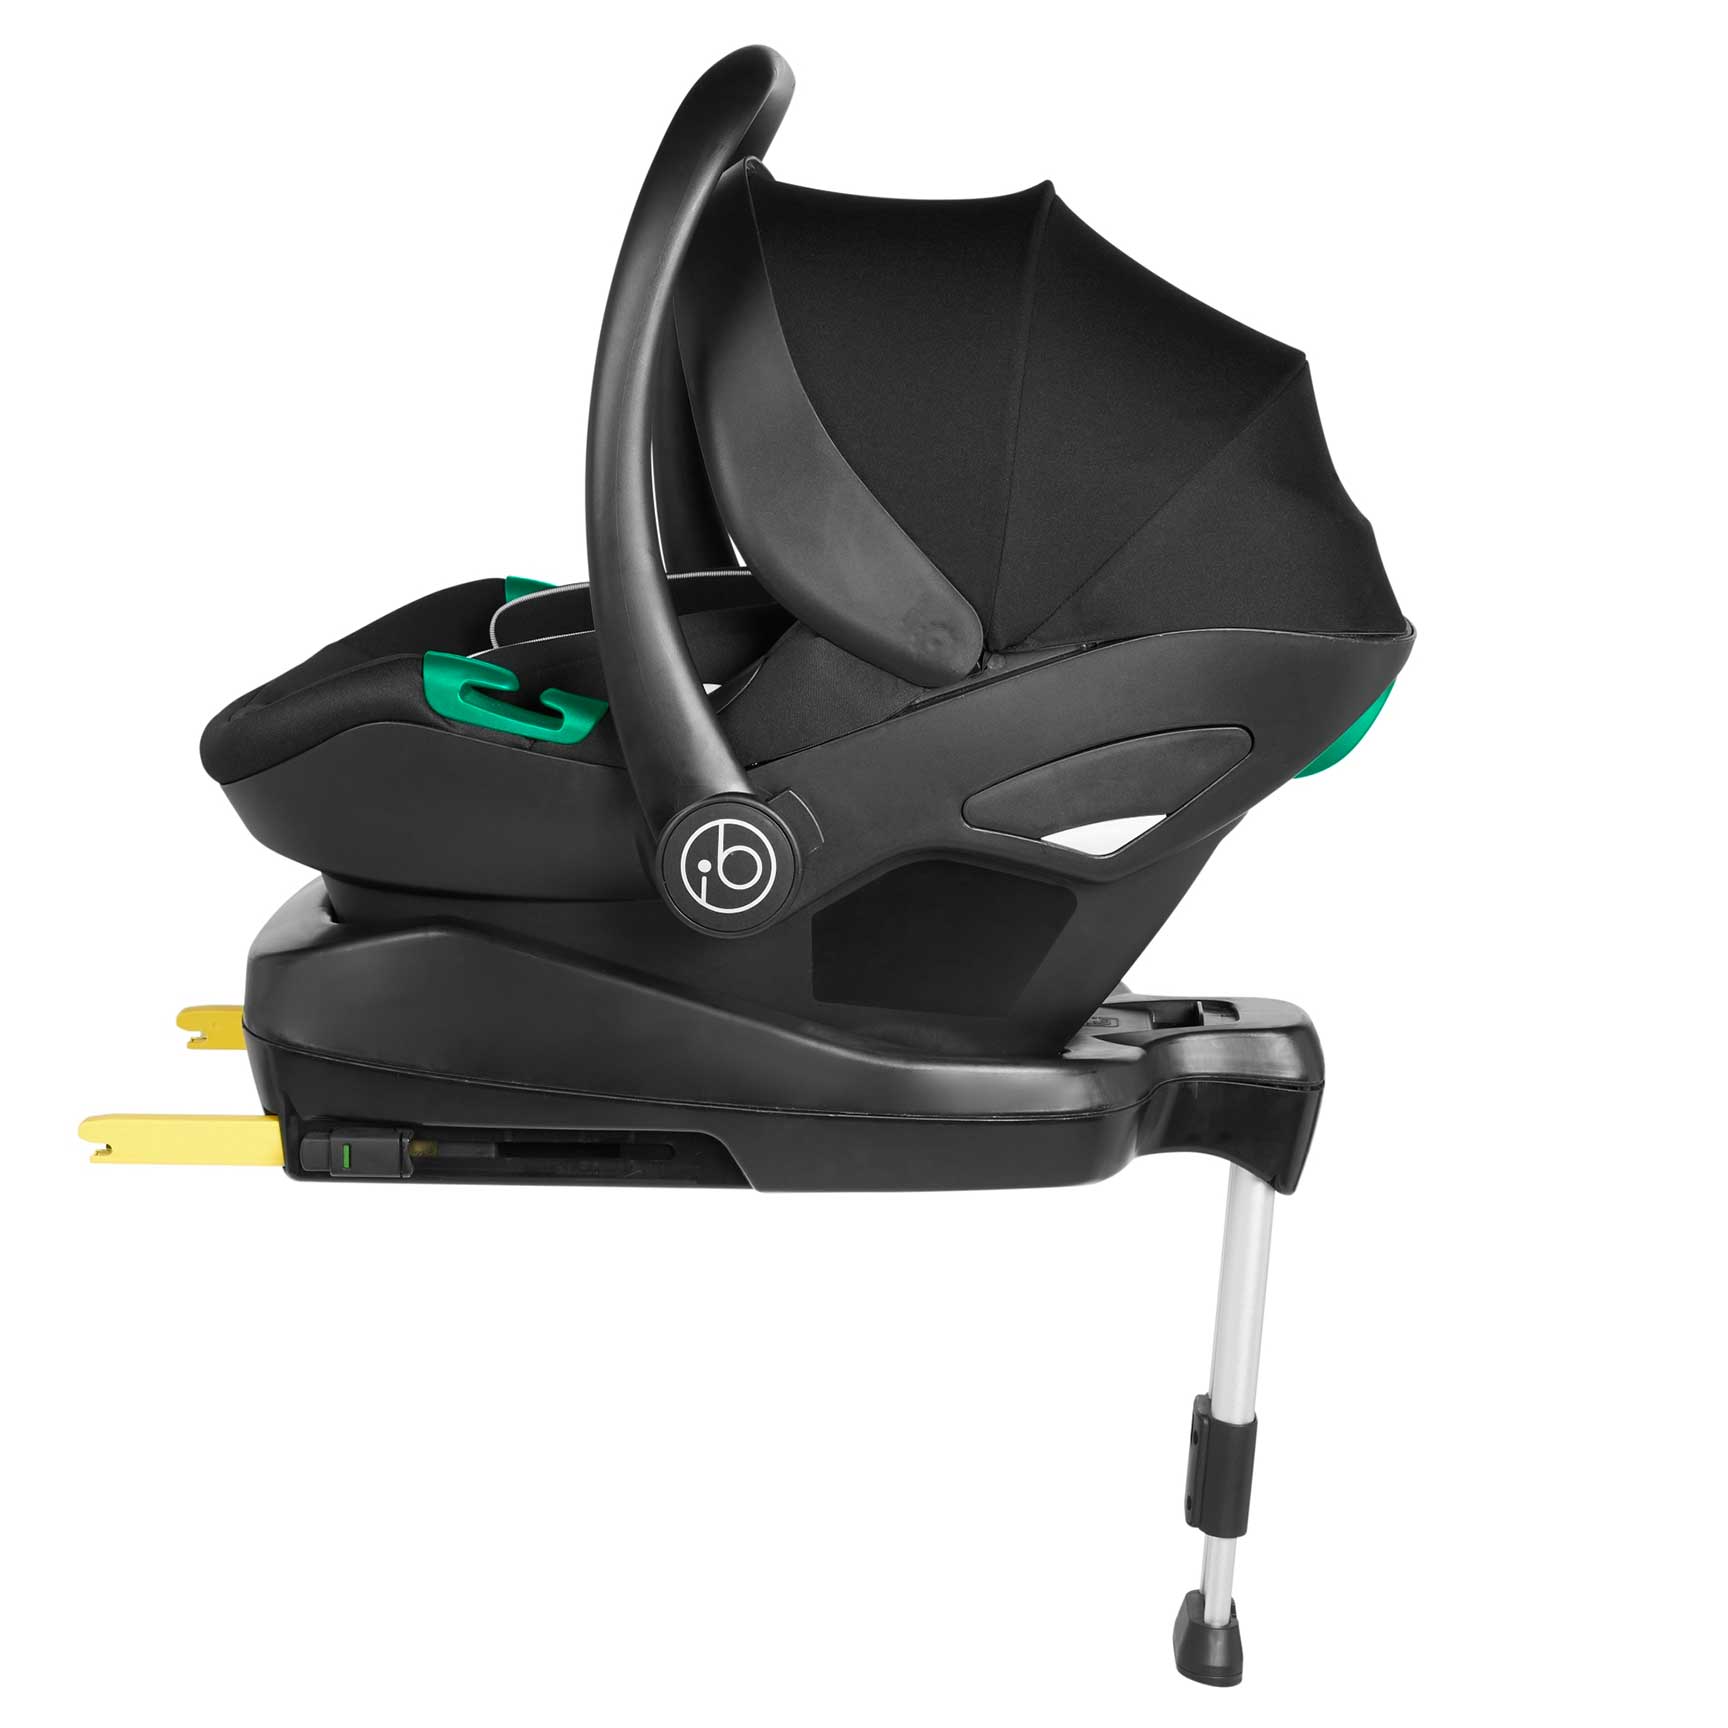 Ickle Bubba Stomp Luxe All-in-One Travel System with Isofix Base in Black/Charcoal Grey/Tan Travel Systems 10-011-300-207 5056515026443